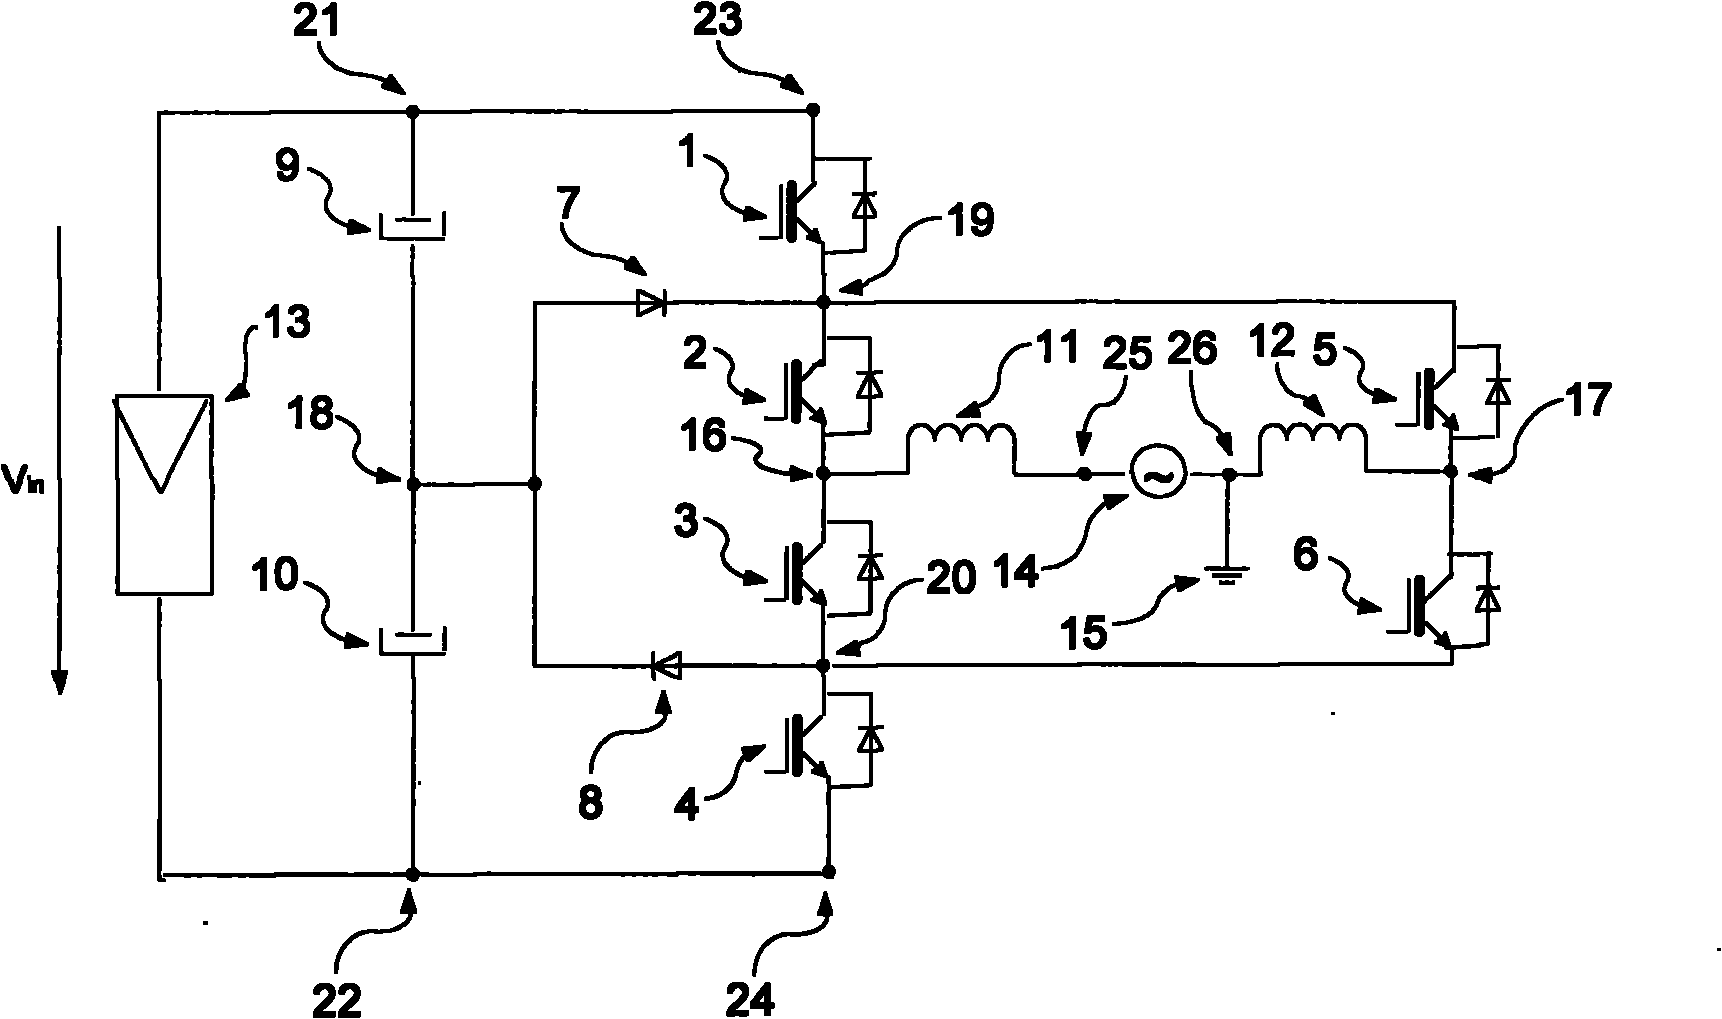 Photovoltaic grid-connected three-level inverter